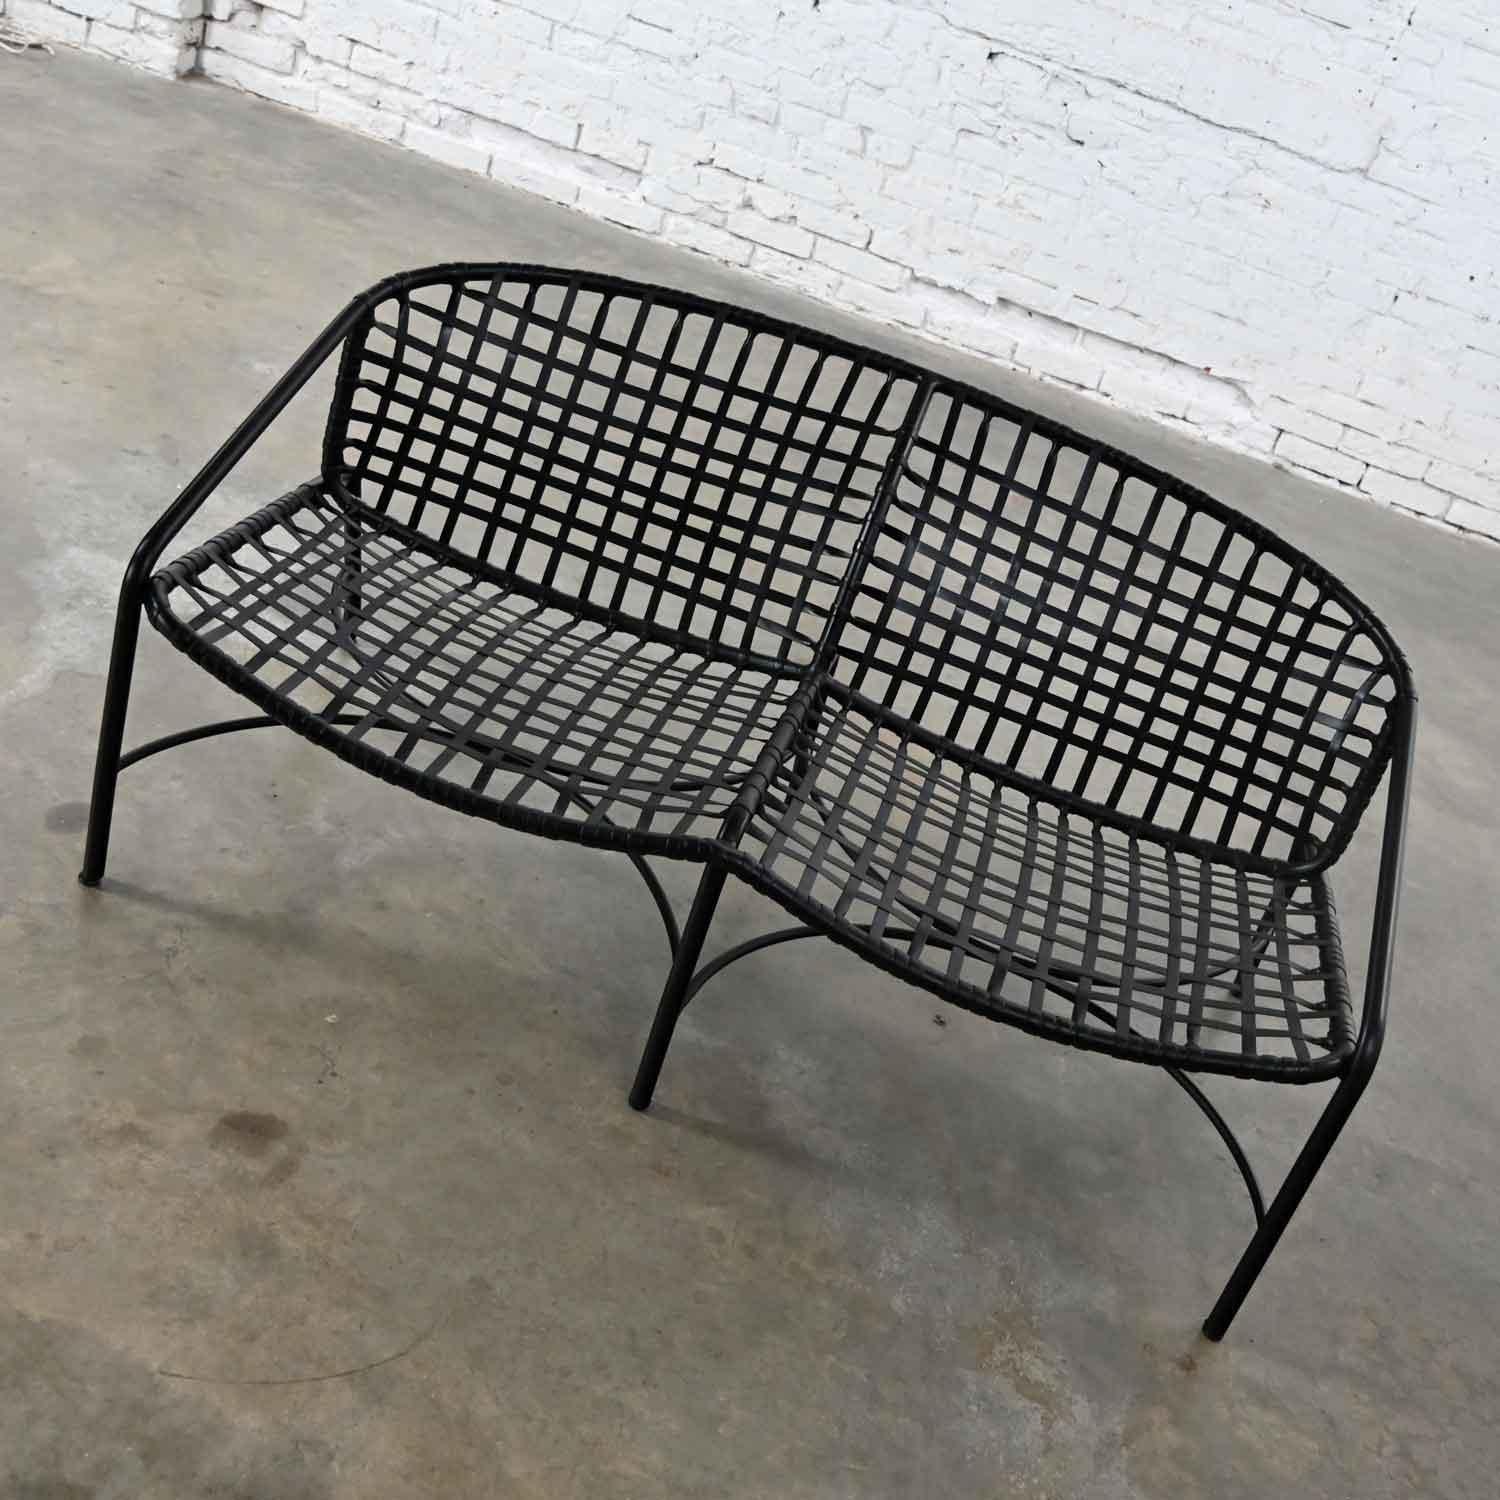 Beautiful vintage Mid-Century Modern black vinyl webbing & black powder coated aluminum frame settee attributed to Brown Jordan for the Kantan Collection by Tadao Inouye. Gorgeous condition, keeping in mind that this is vintage and not new so will